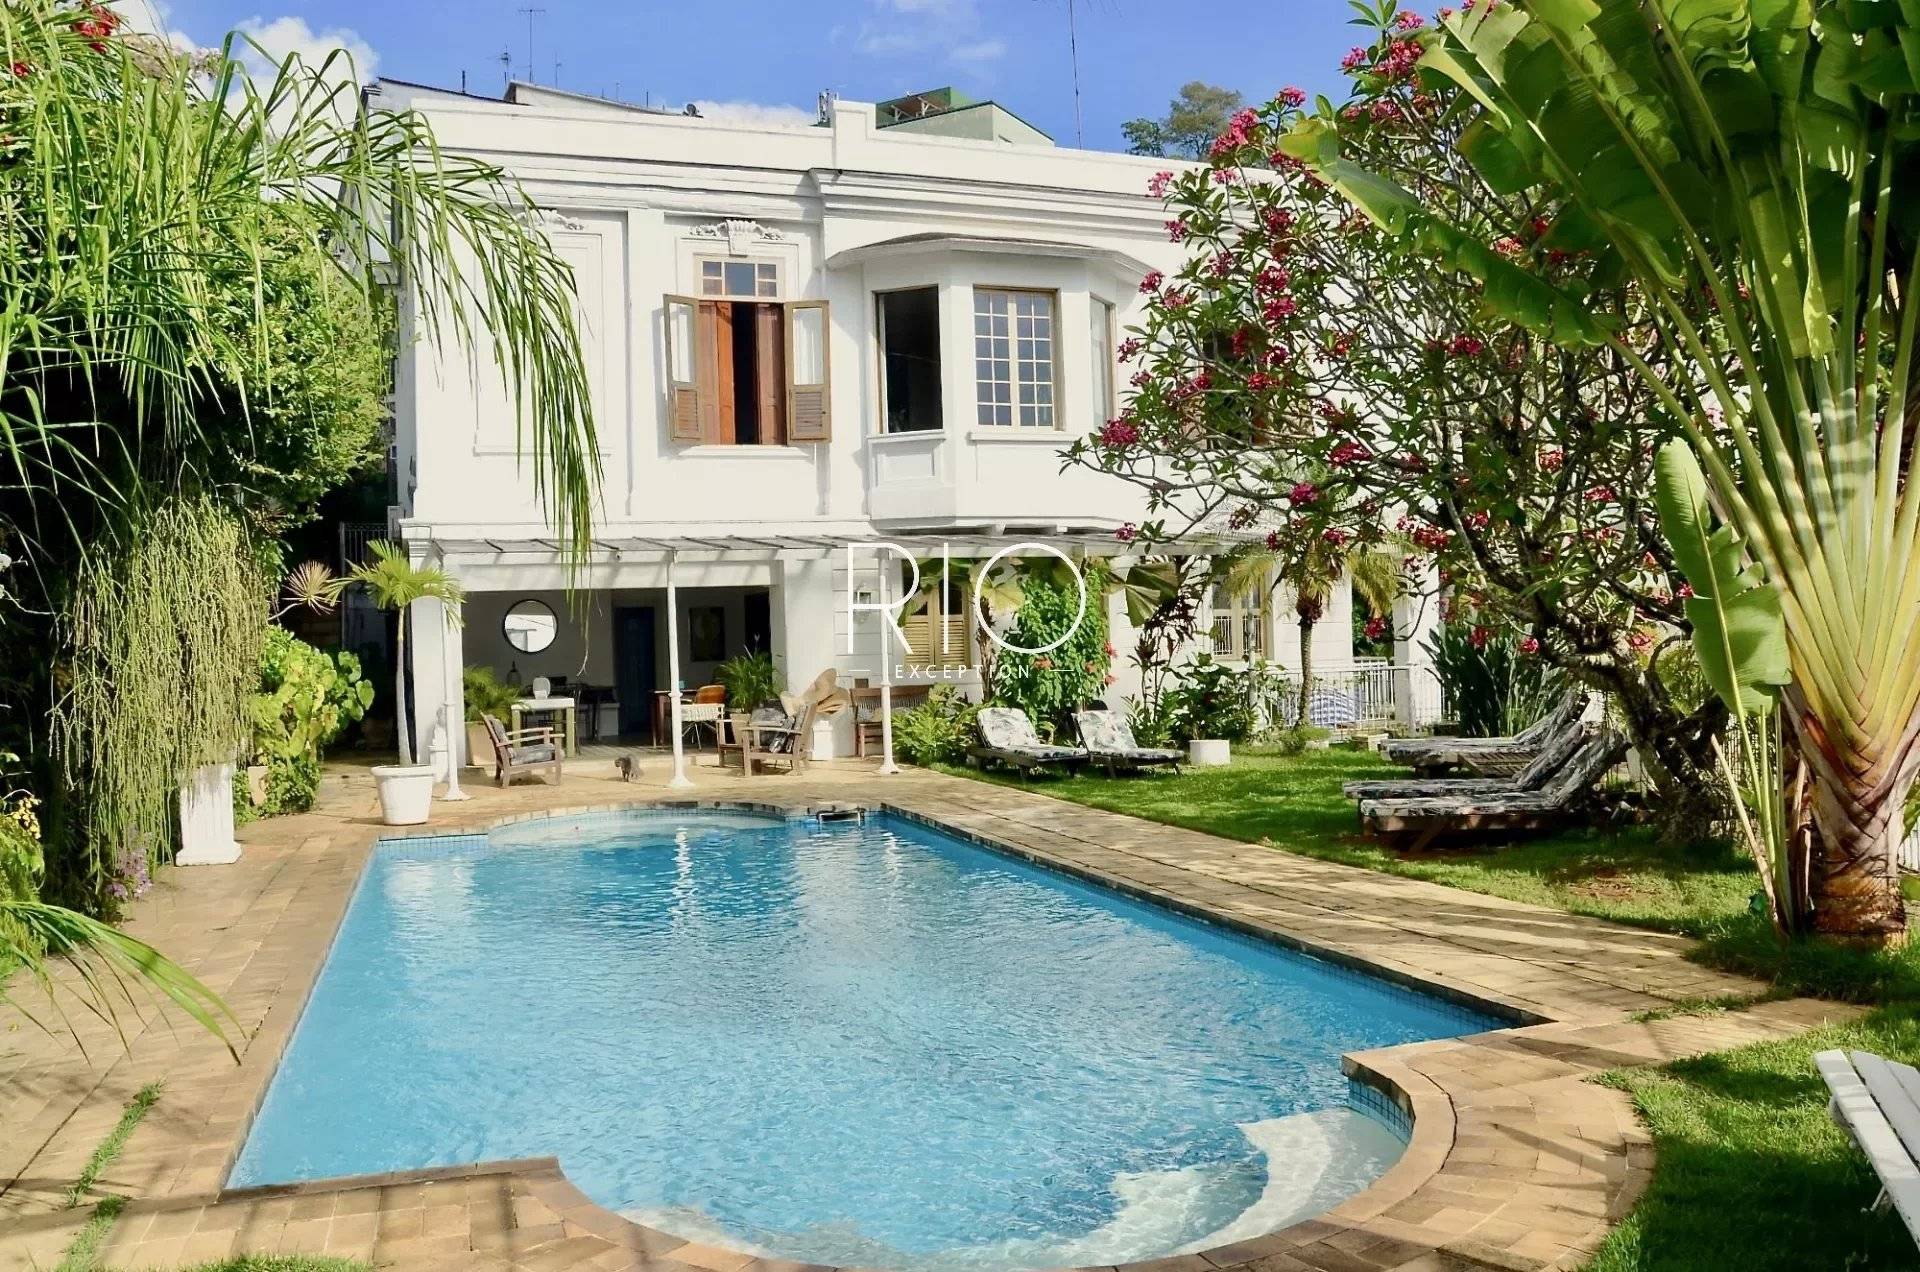 SANTA TERESA - Boutique Hotel in an exceptional colonial house - 7 luxurious suites - Tropical garden with swimming pool and sea view !